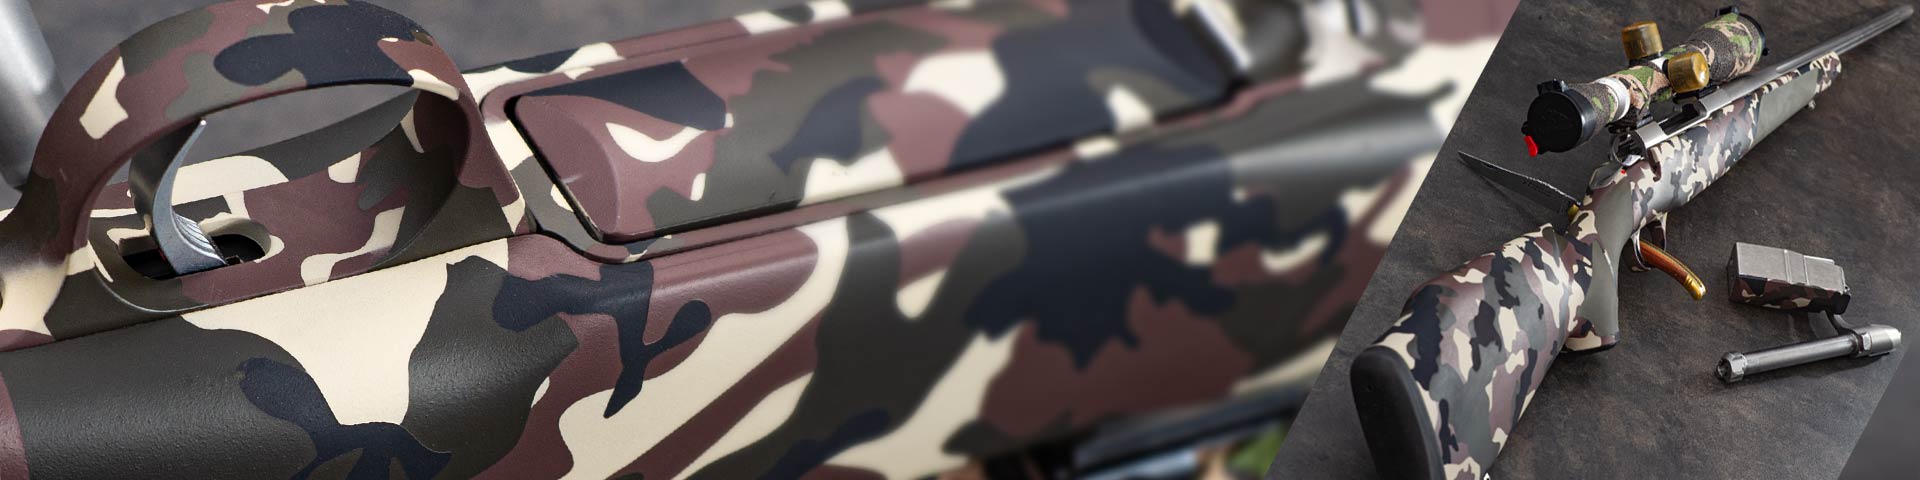 Application Cerakote Camouflage 4 couleurs type CE carabine chasse Sako 75 cal .270win